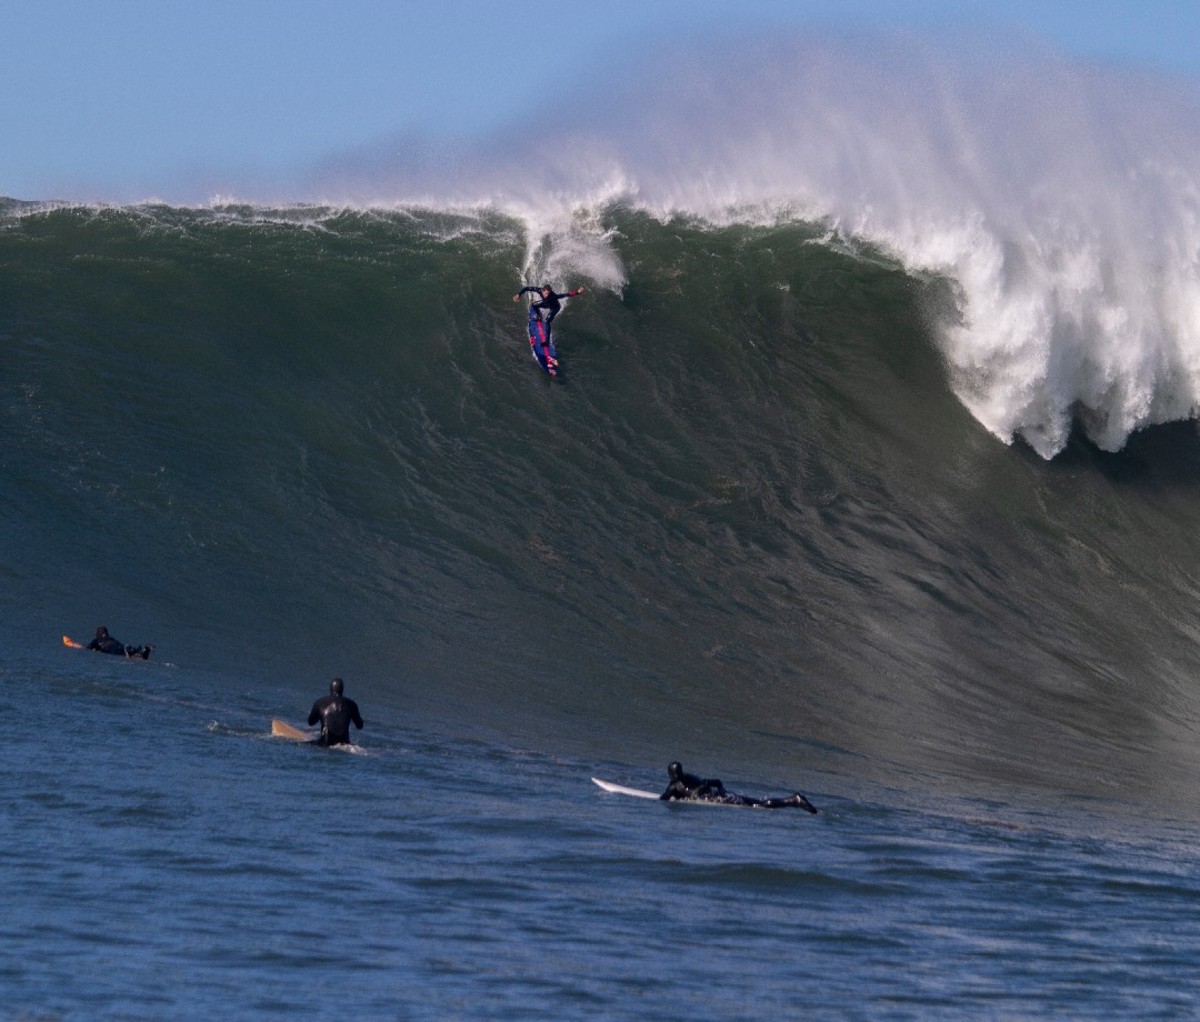 Kai Lenny rides down the crest of a giant wave.